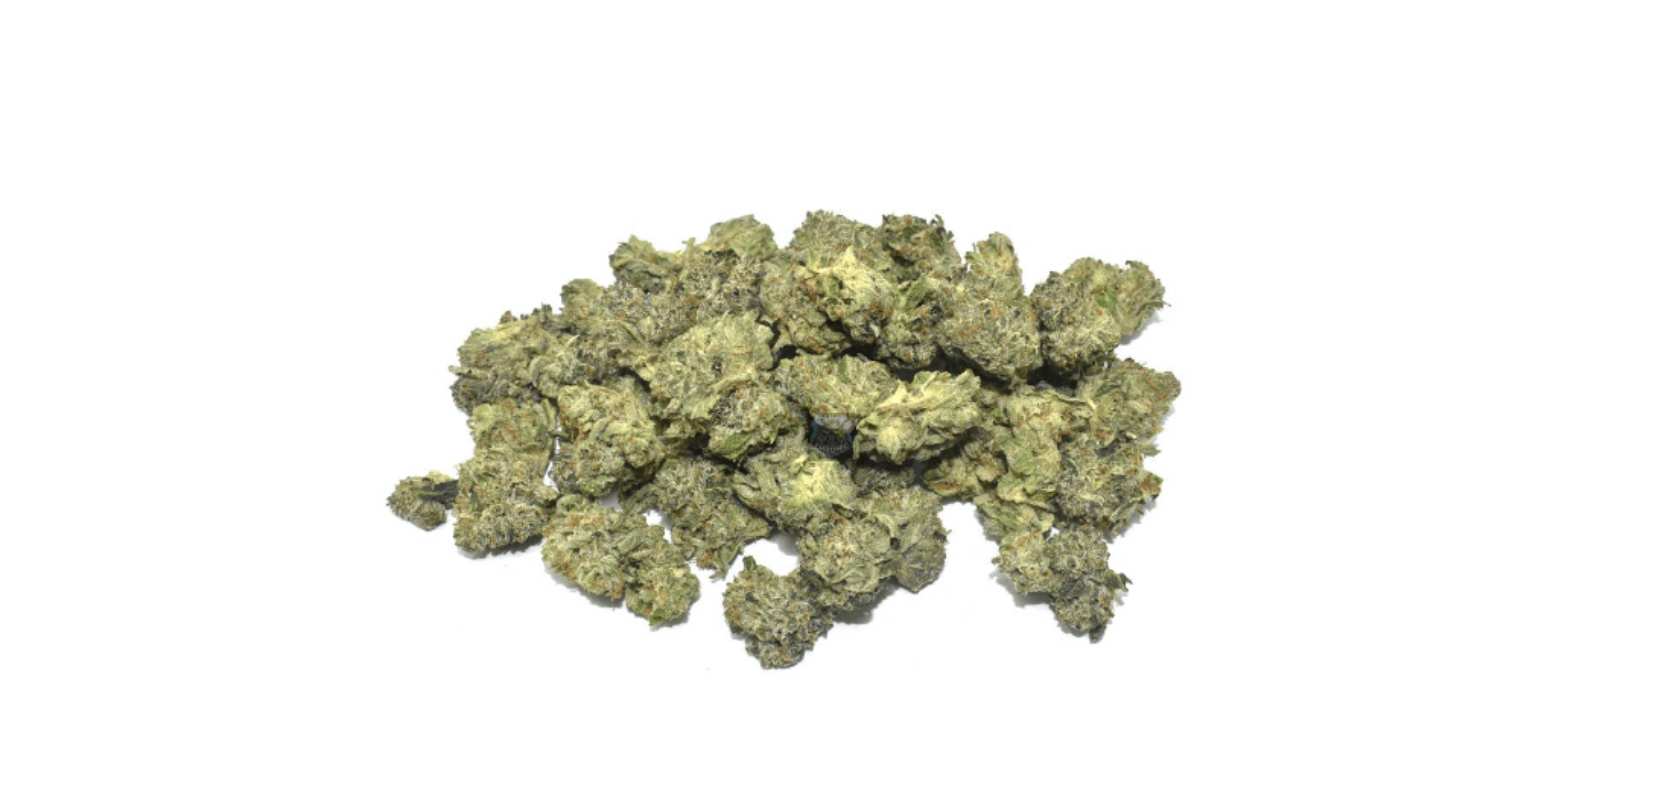 Skywalker OG, also known as "Skywalker OG Kush" to many members of the cannabis community, is an Indica dominant hybrid (85% Indica/15% Sativa) strain that is a potent cross between the hugely popular Skywalker and OG Kush strains. 